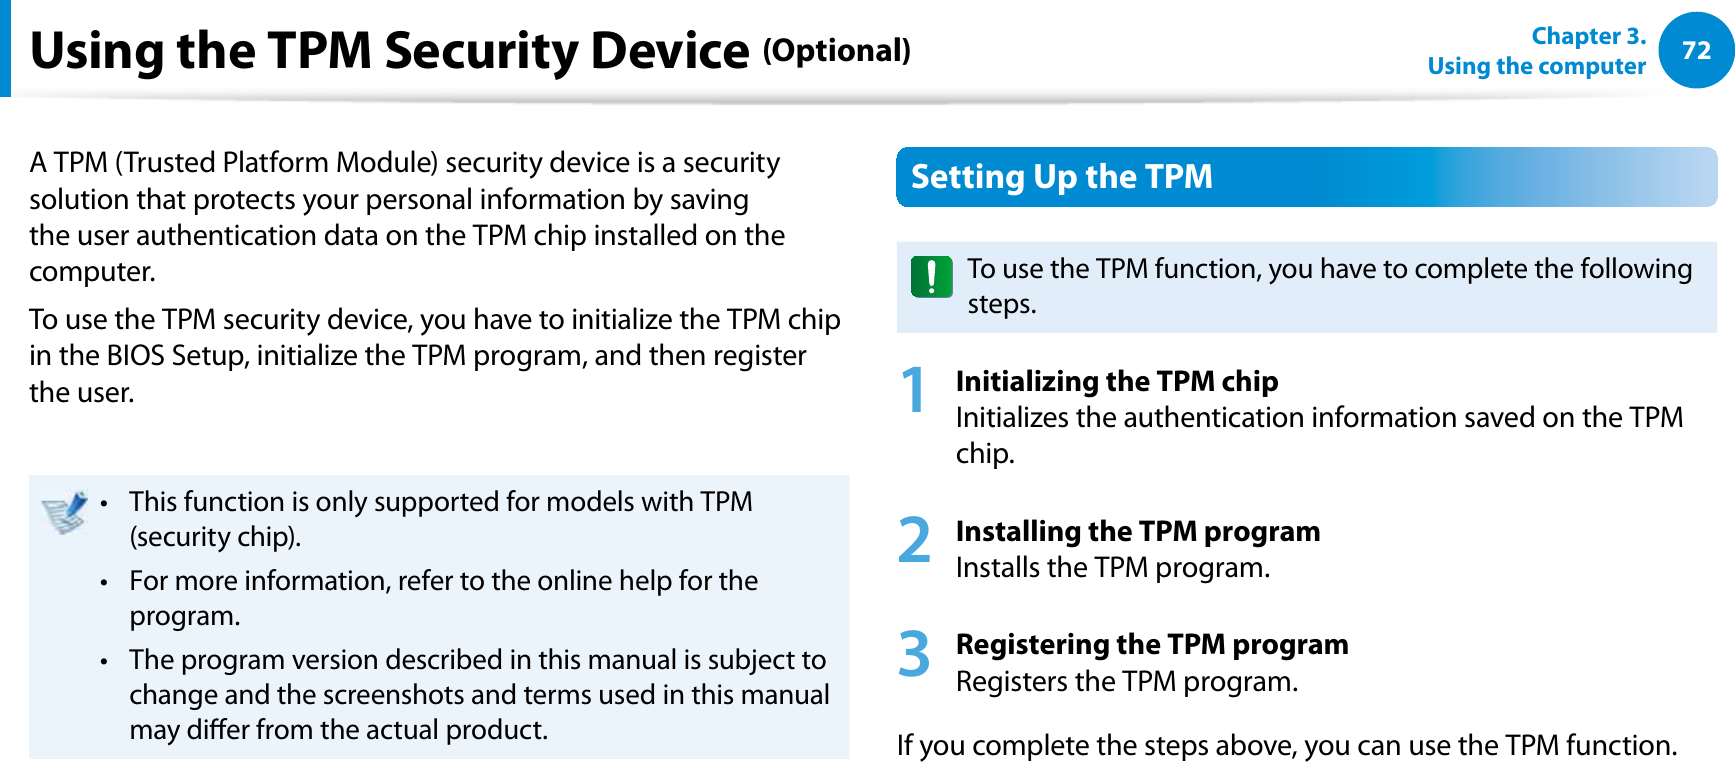 72Chapter 3.  Using the computerUsing the TPM Security Device (Optional)A TPM (Trusted Platform Module) security device is a security solution that protects your personal information by saving the user authentication data on the TPM chip installed on the computer.To use the TPM security device, you have to initialize the TPM chip in the BIOS Setup, initialize the TPM program, and then register the user.This function is only supported for models with TPM t (security chip).For more information, refer to the online help for the t program.The program version described in this manual is subject to t change and the screenshots and terms used in this manual may dier from the actual product.Setting Up the TPMTo use the TPM function, you have to complete the following steps.1 Initializing the TPM chip Initializes the authentication information saved on the TPM chip.2 Installing the TPM program Installs the TPM program.3 Registering the TPM program Registers the TPM program. If you complete the steps above, you can use the TPM function.